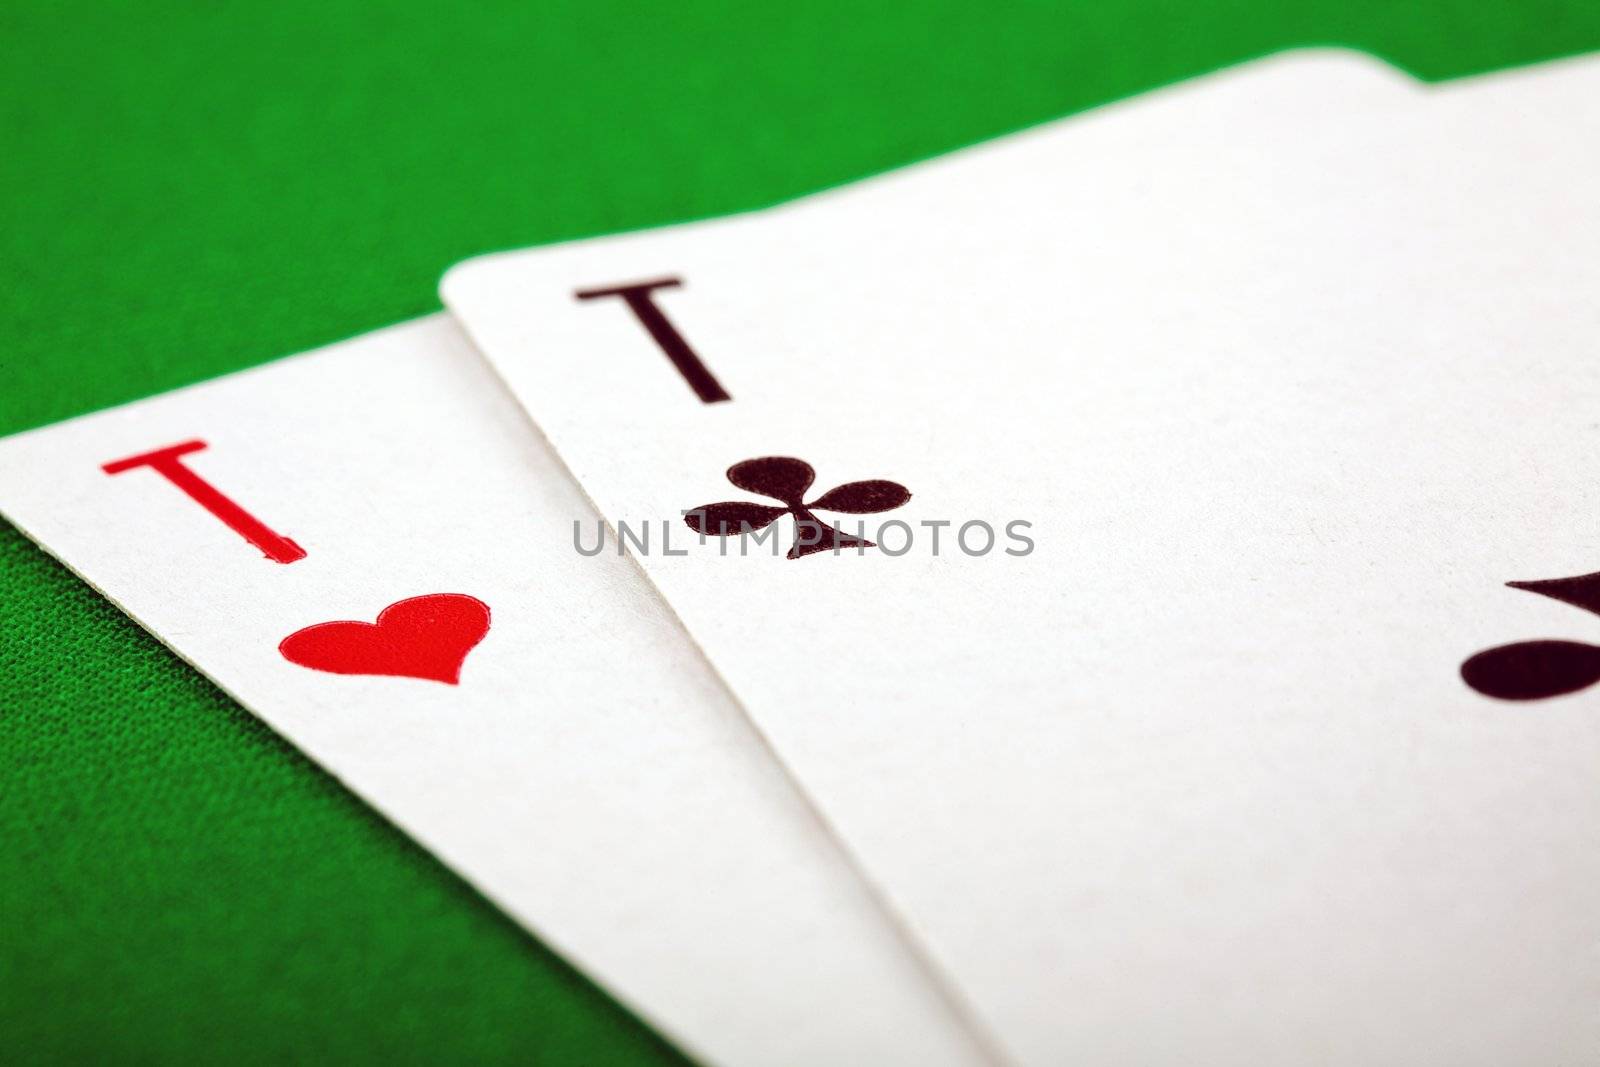 An image of two playing cards on green background